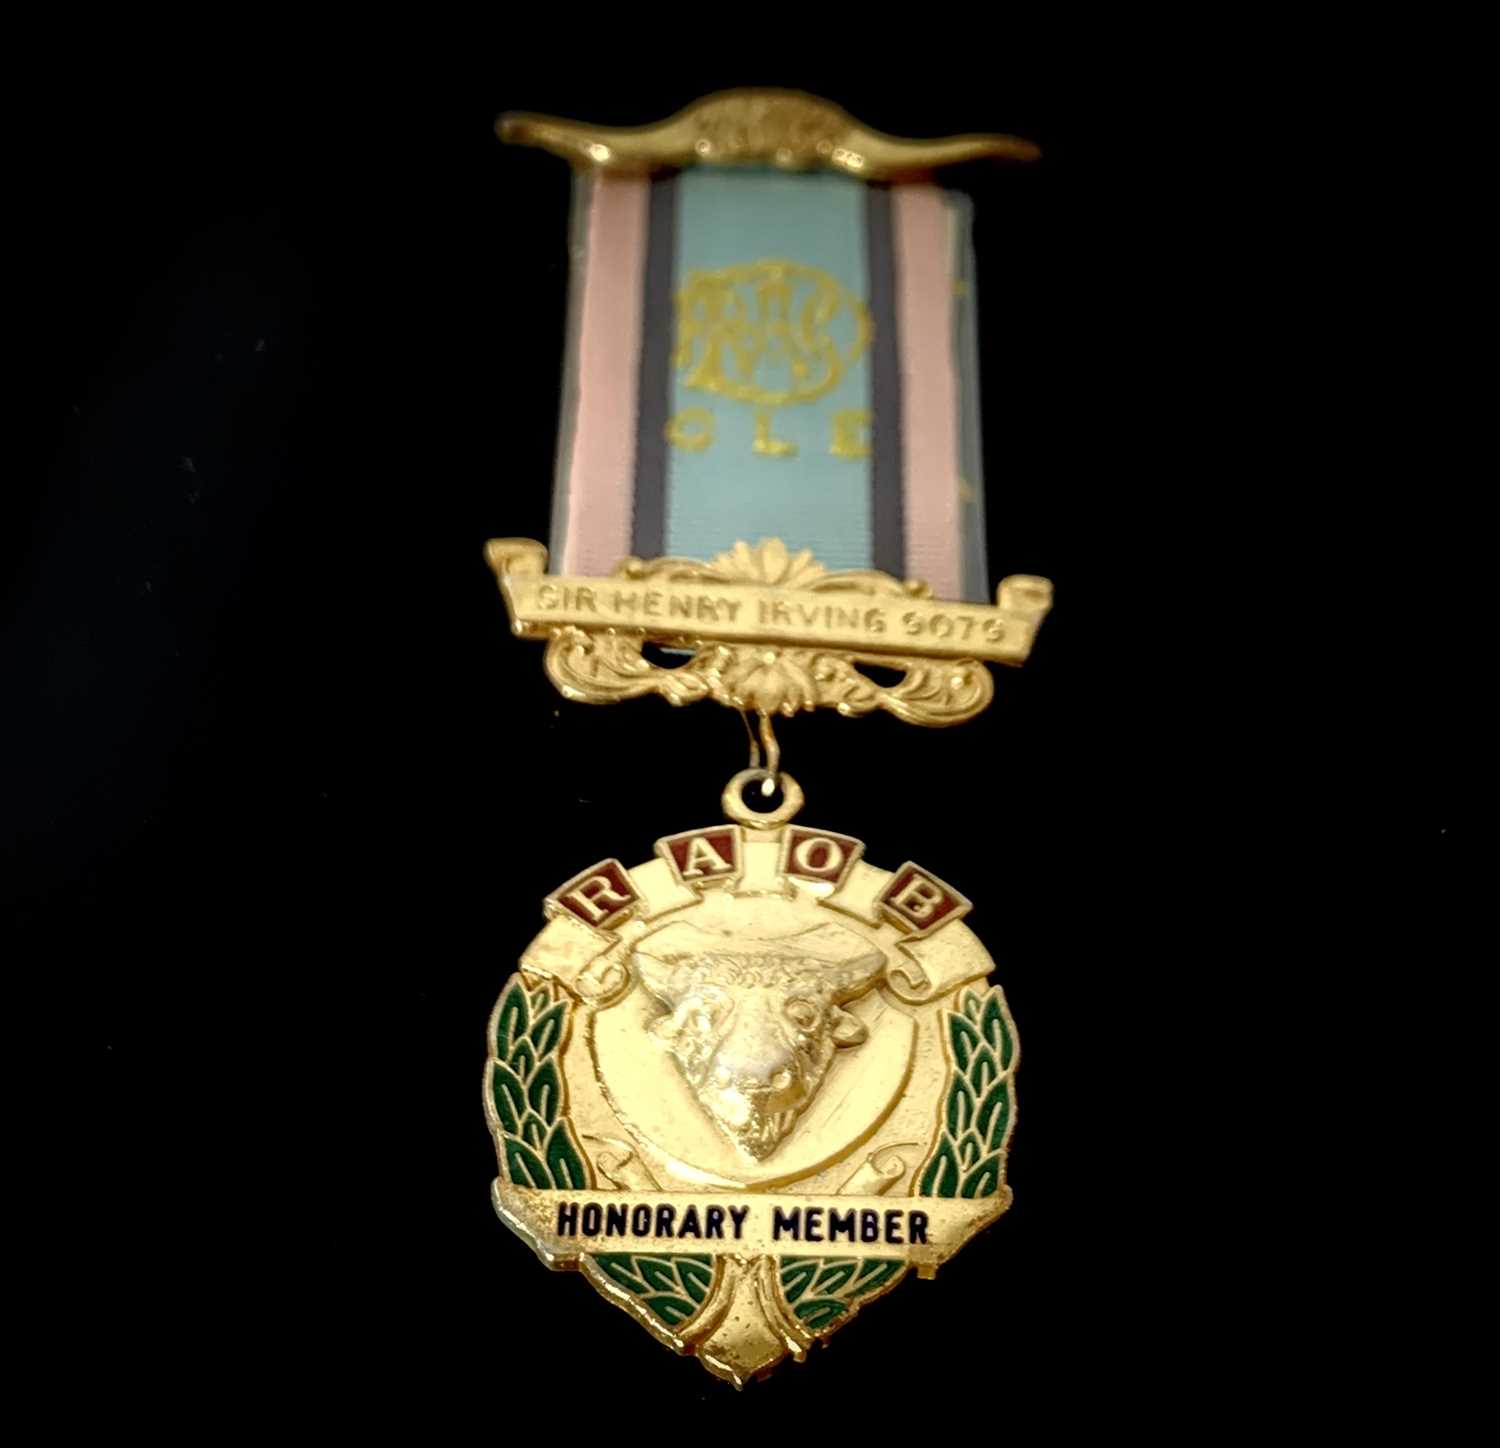 RAOB Medals - group of 5 to G.Ware 1960's - 1990's, 4 silver Sir Henry Irvine Lodge. - Image 6 of 16